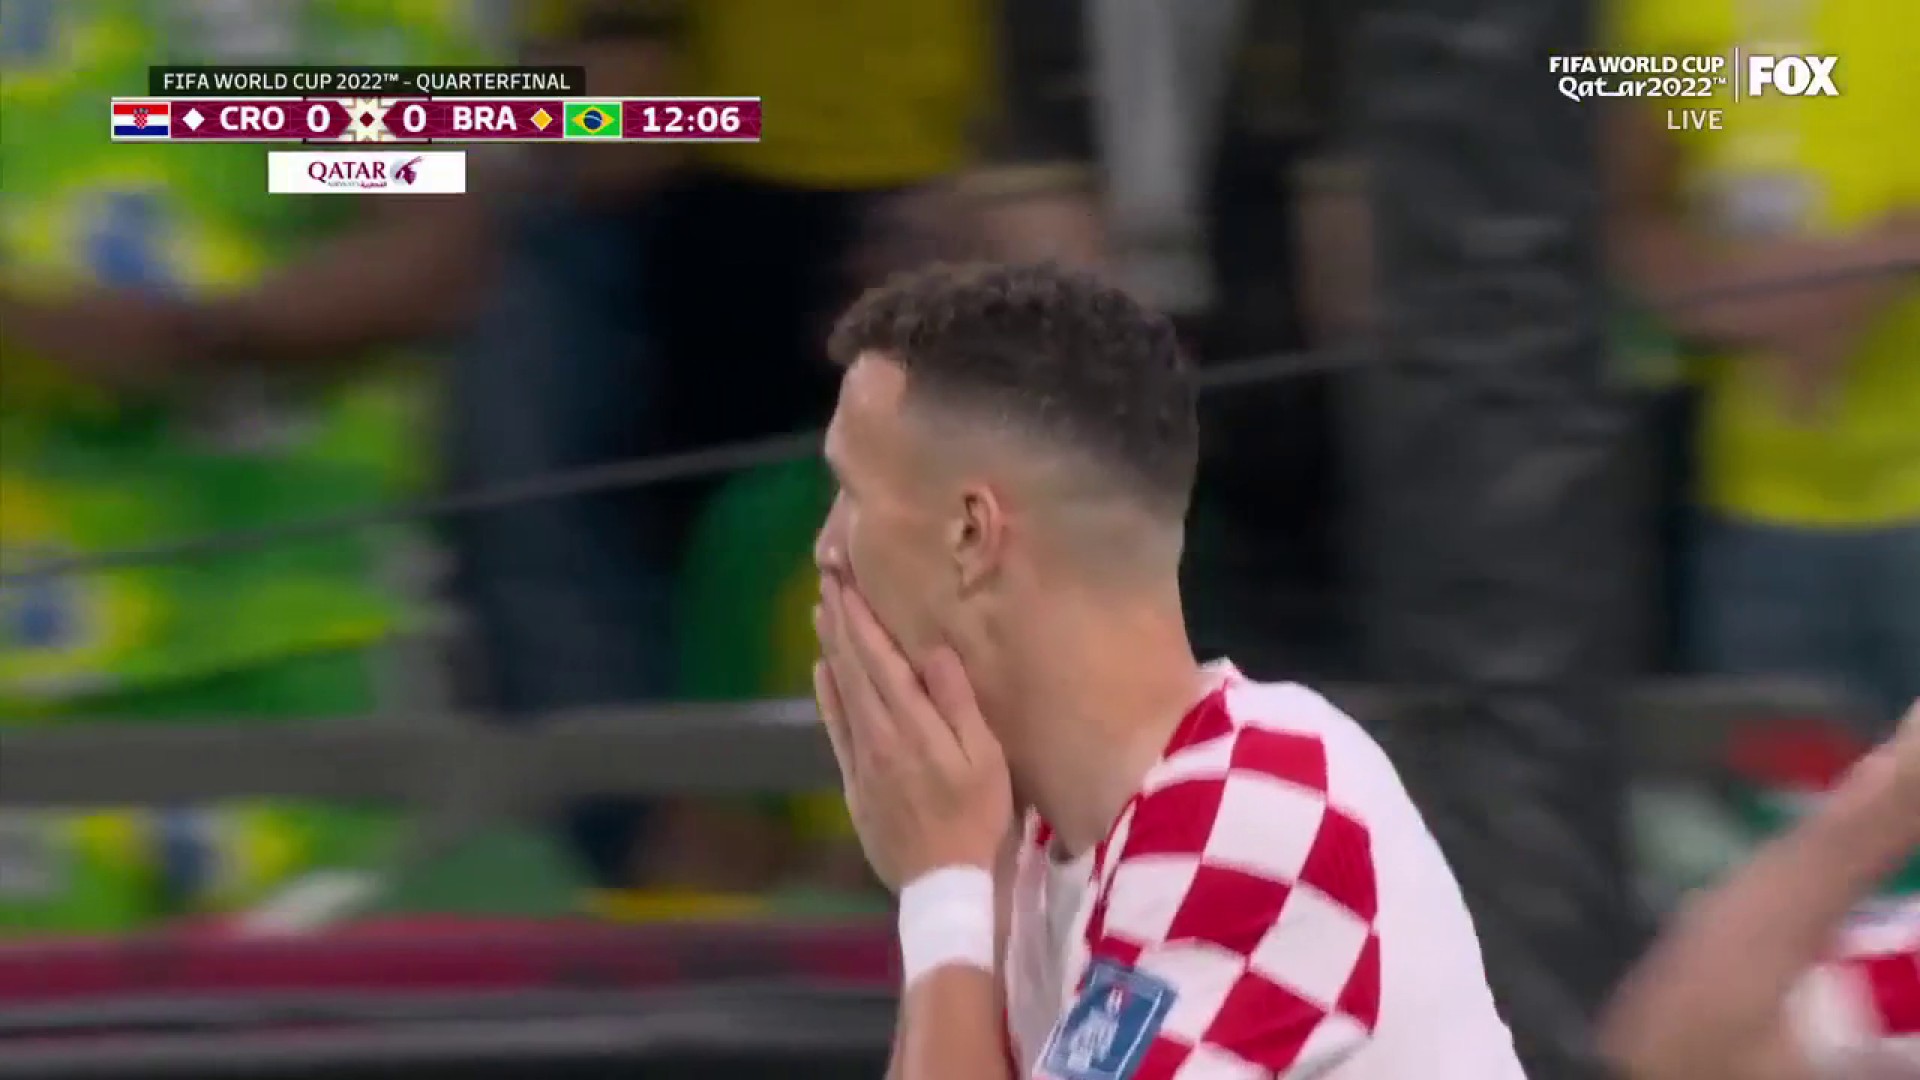 Croatia gets its first big chance of the game 👀”